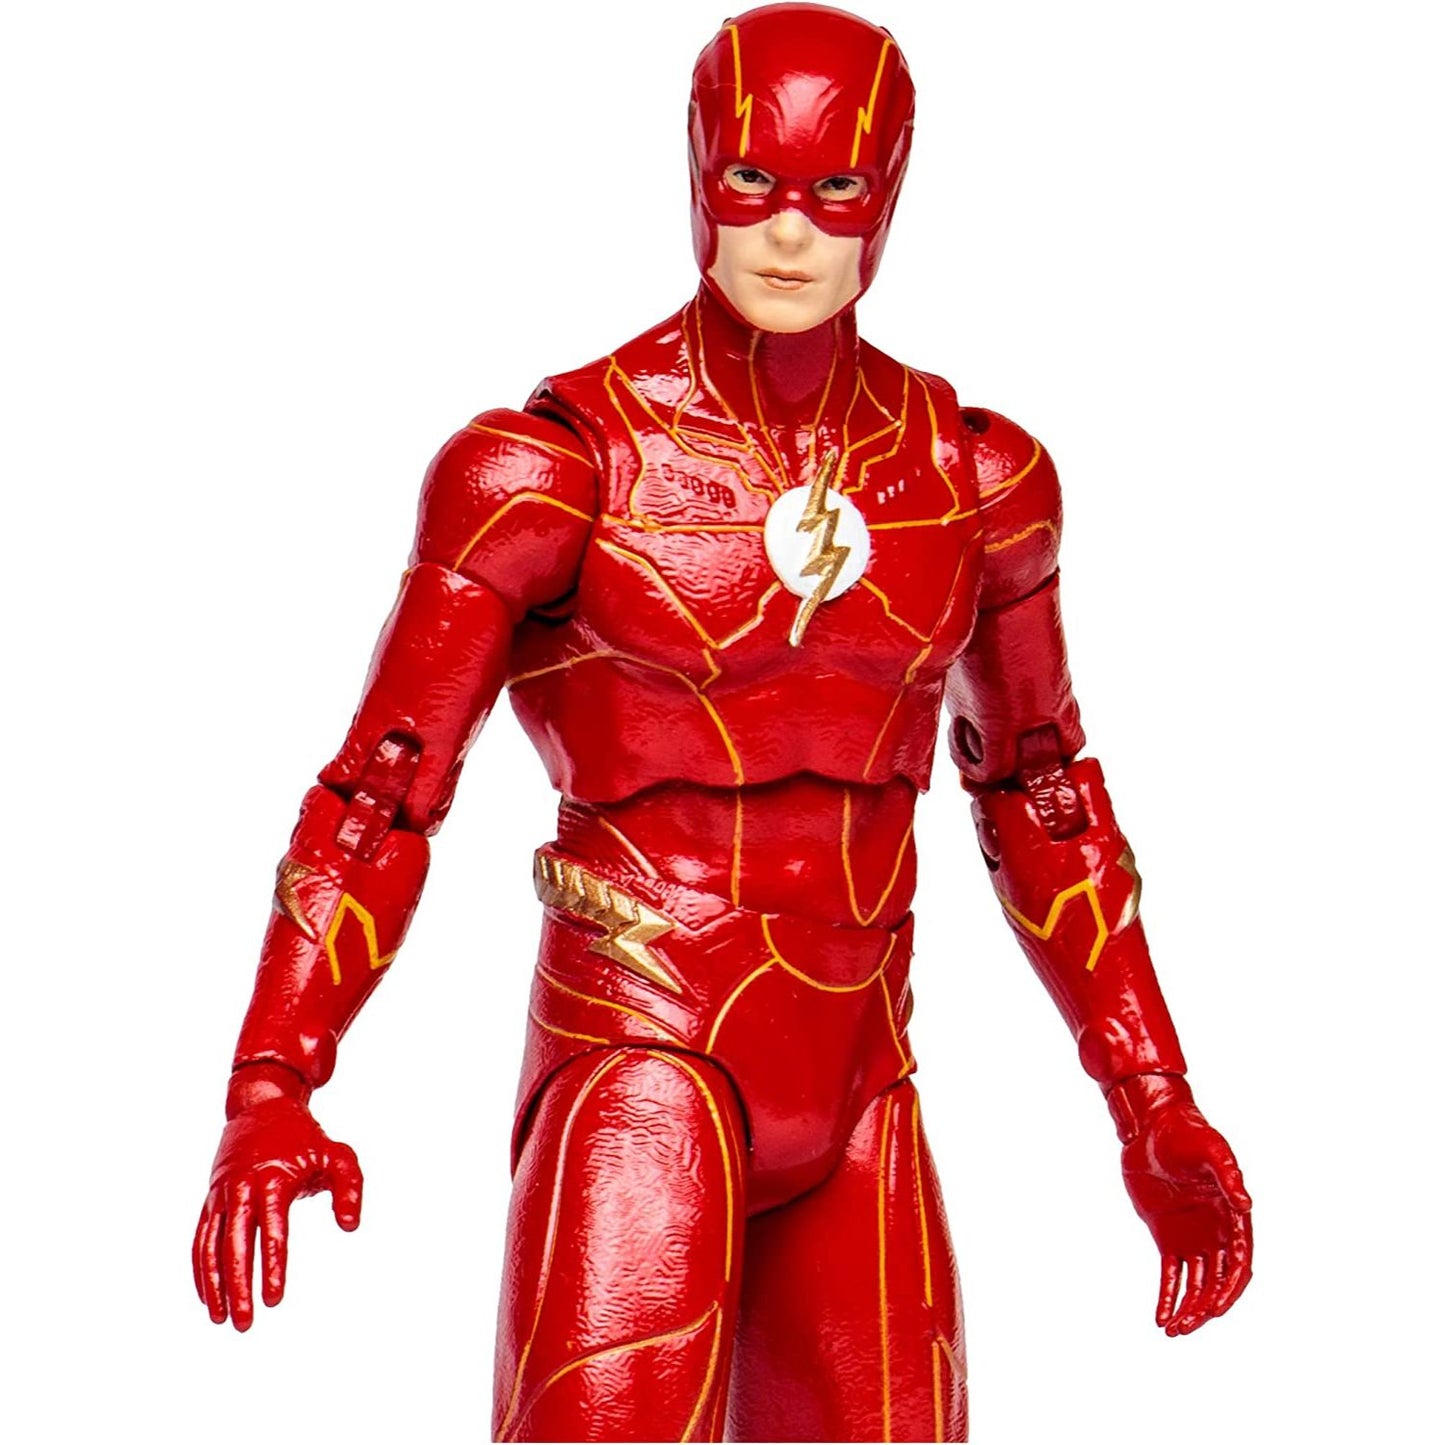 DC Multiverse - The Flash Movie - The Flash Action Figure 7INCh Toy Close up look - Heretoserveyou